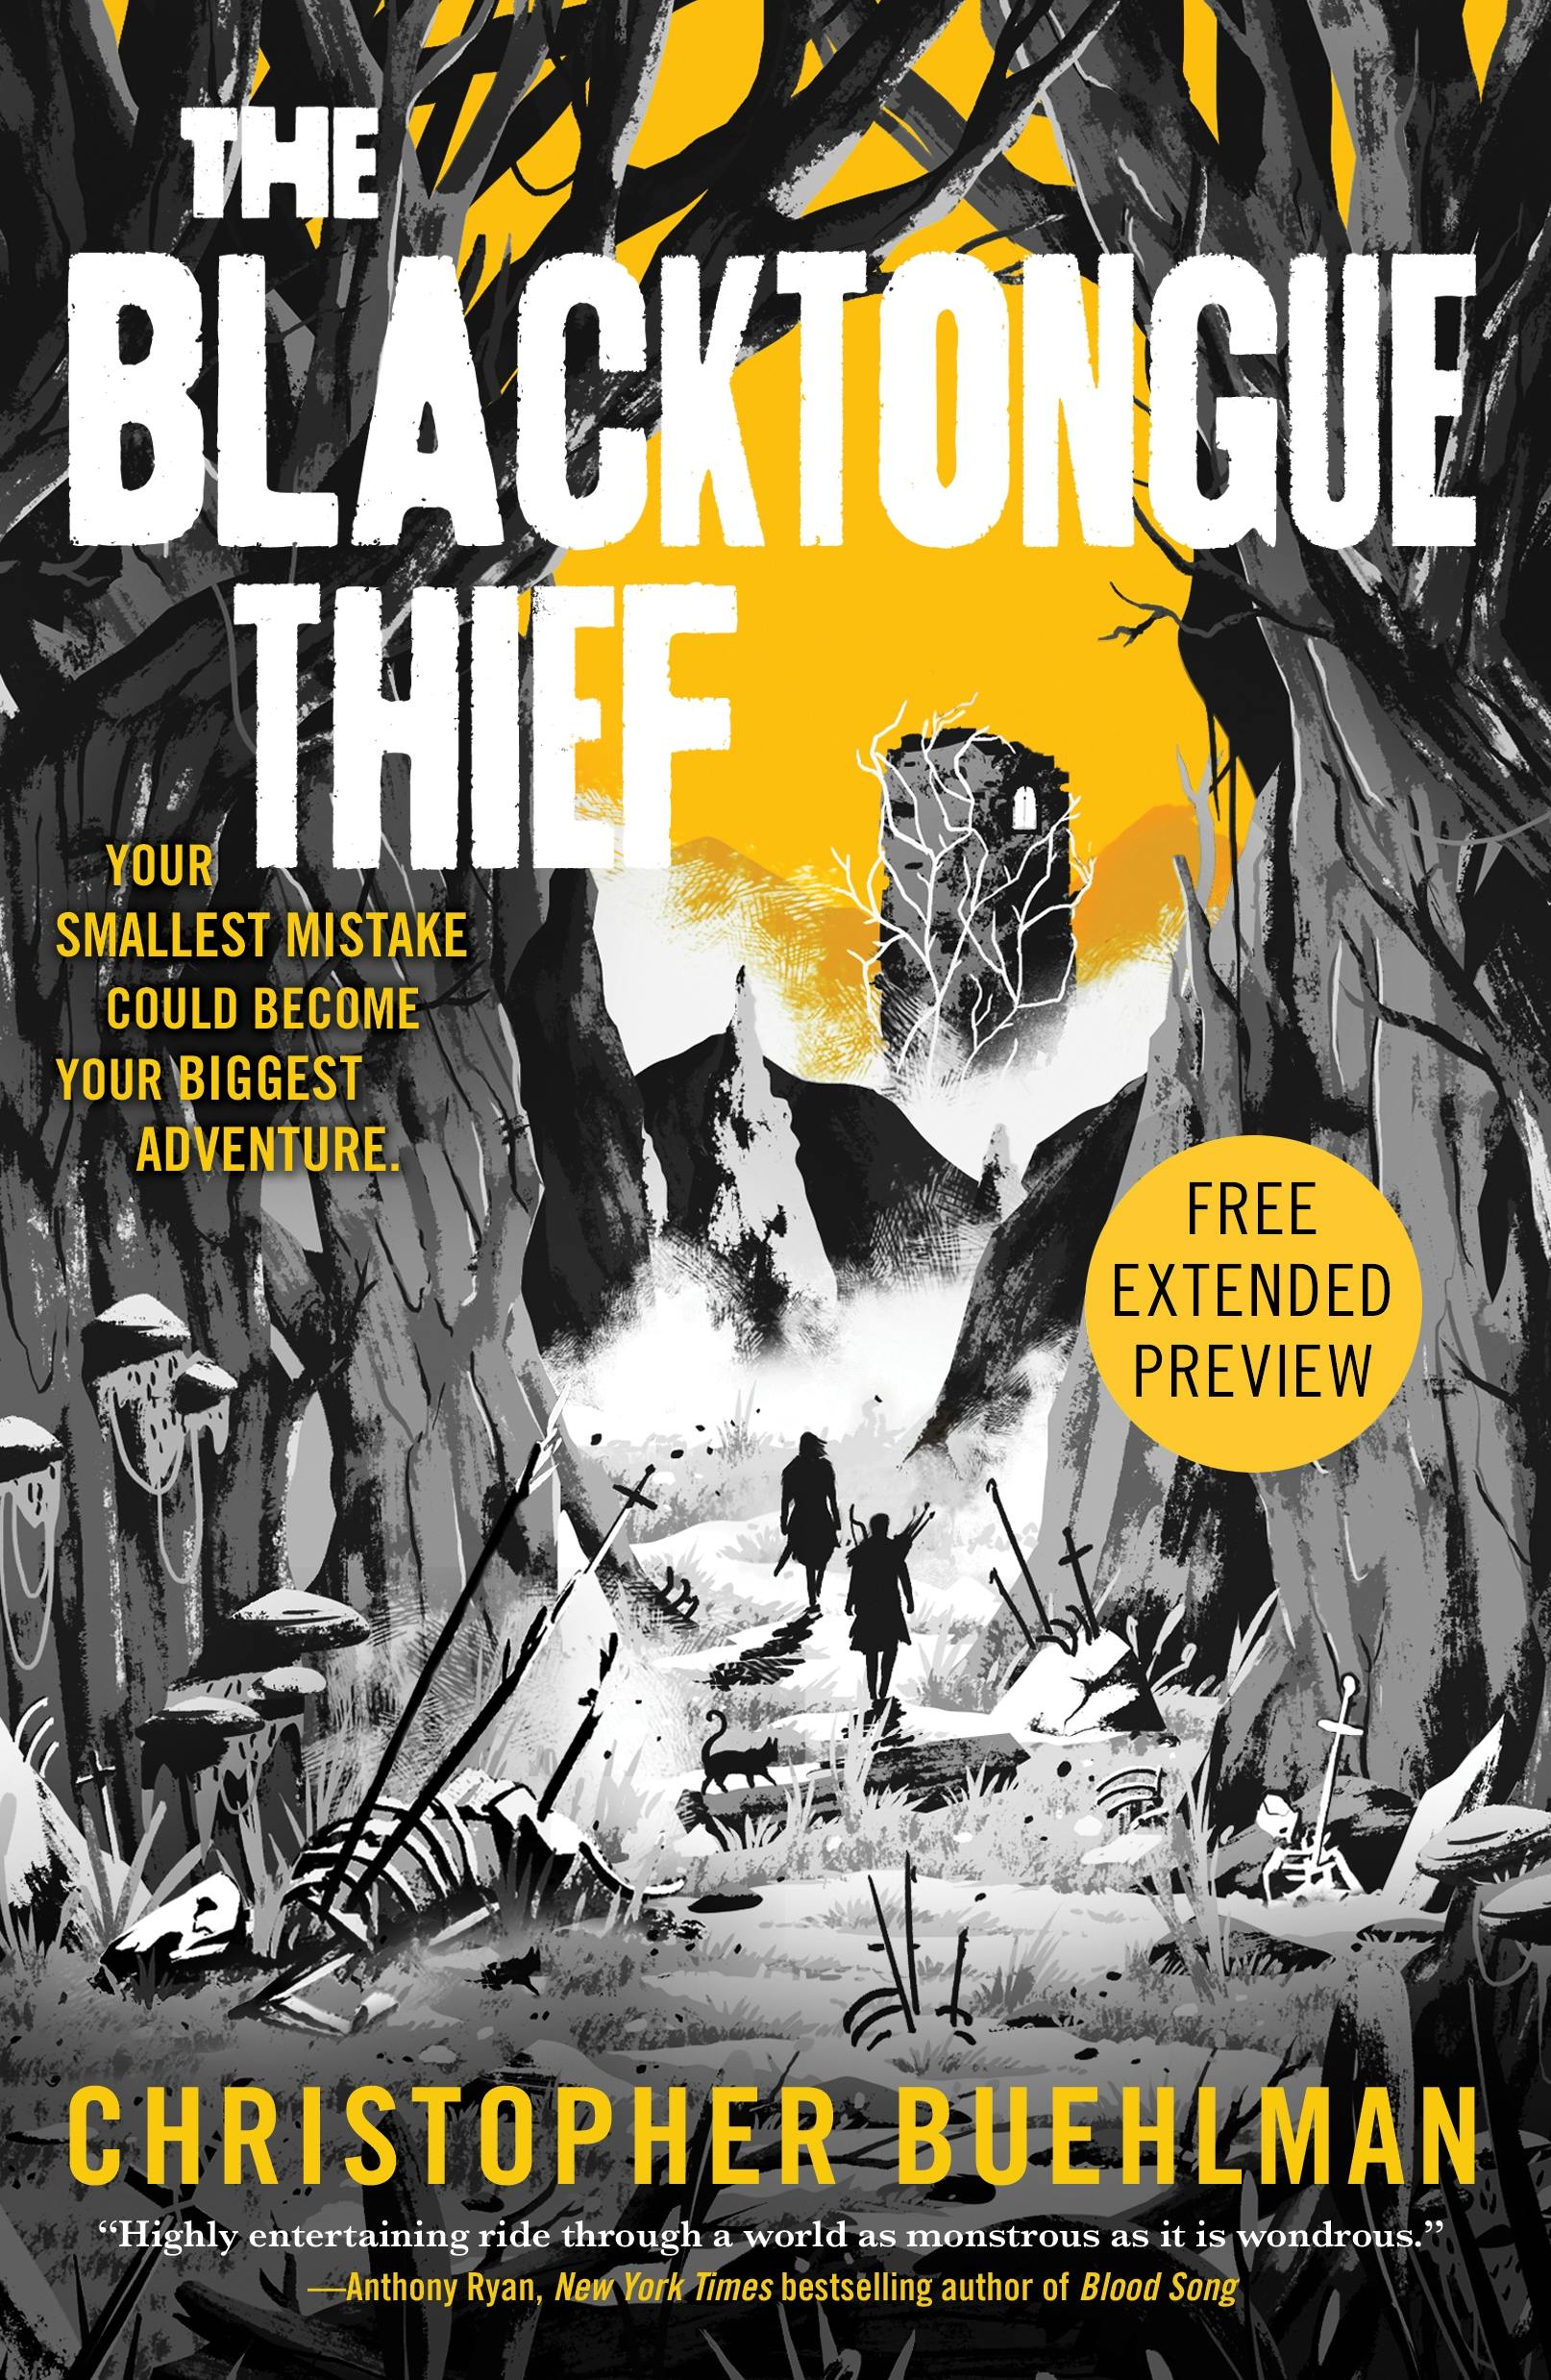 Cover for the book titled as: The Blacktongue Thief Sneak Peek